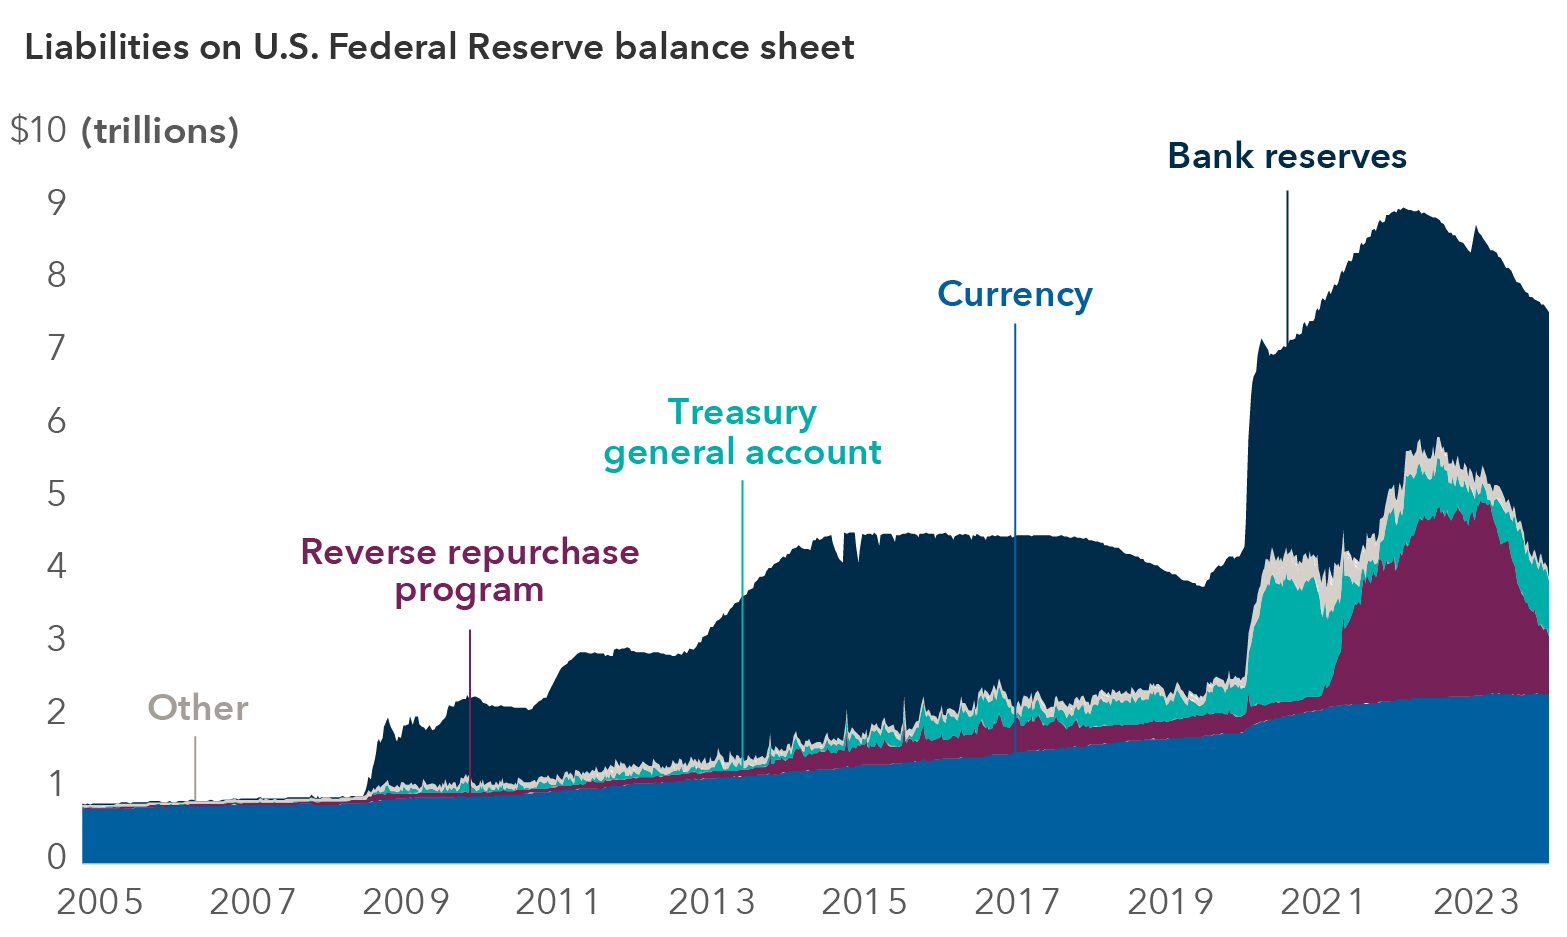 The chart above is a stacked area chart showing the liabilities on the U.S. Federal Reserve’s balance sheet from 2005 to March 11, 2024, measured in trillions of dollars. The chart is divided into colored sections, each representing a type of liability: bank reserves, currency, treasury general account (TGA), reverse repurchase agreements (RRP) and “Other,” which includes Treasury cash holdings, foreign official deposits, Treasury equity to credit facilities, other deposits and other liabilities (e.g. remittances). The y-axis shows the amount of liabilities on the Fed’s balance sheet from zero to $10 trillion. From 2005 to around mid-2008, the chart shows about $1 trillion in currency liabilities, with minimal amounts of bank reserves and RRP. During the 2008 global financial crisis, bank reserves significantly increased. This increase in bank reserves marks a significant shift in the composition of the liabilities. From late 2008 onwards, bank reserves continue to dominate the chart with some fluctuations, but they generally increase. The total liabilities peaked at about $9 trillion around 2023. Since the COVID-19 pandemic in 2020, the chart also shows an increase in TGA and RRP by about $1 trillion each. RRP has since shrunk to around $500 billion.